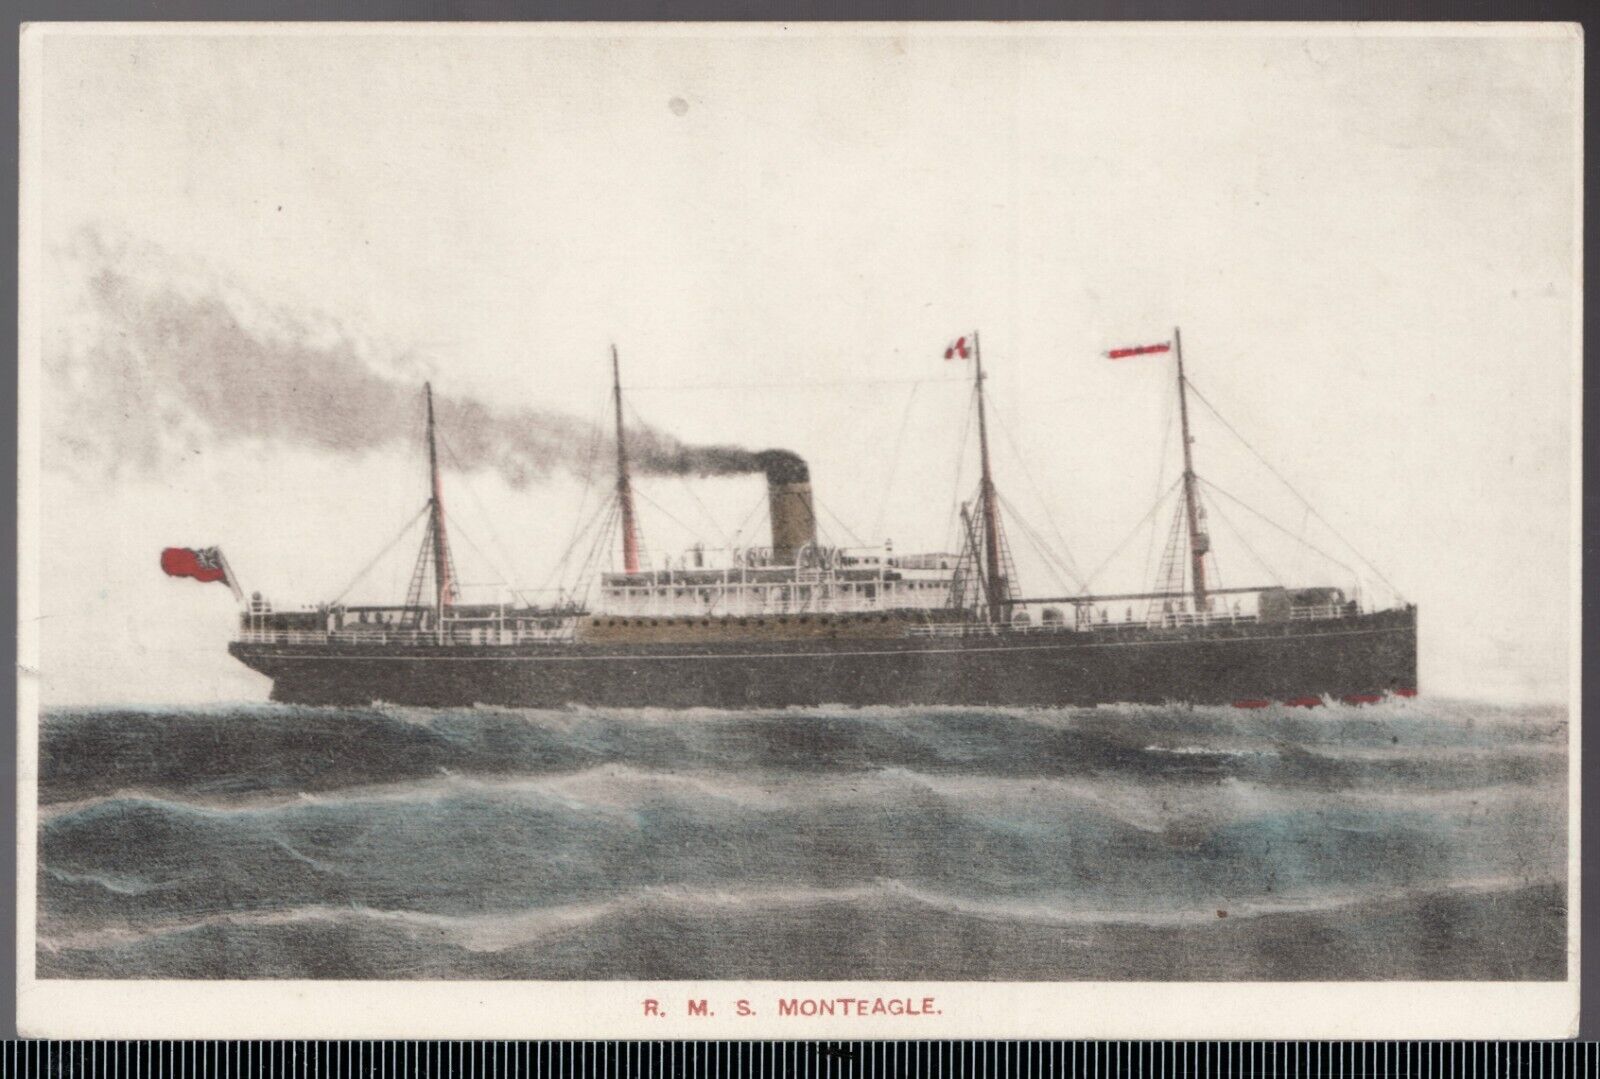 Rare Japanese printing of c1915 R.M.S. Monteagle - CPR Company's Pacific Steamer